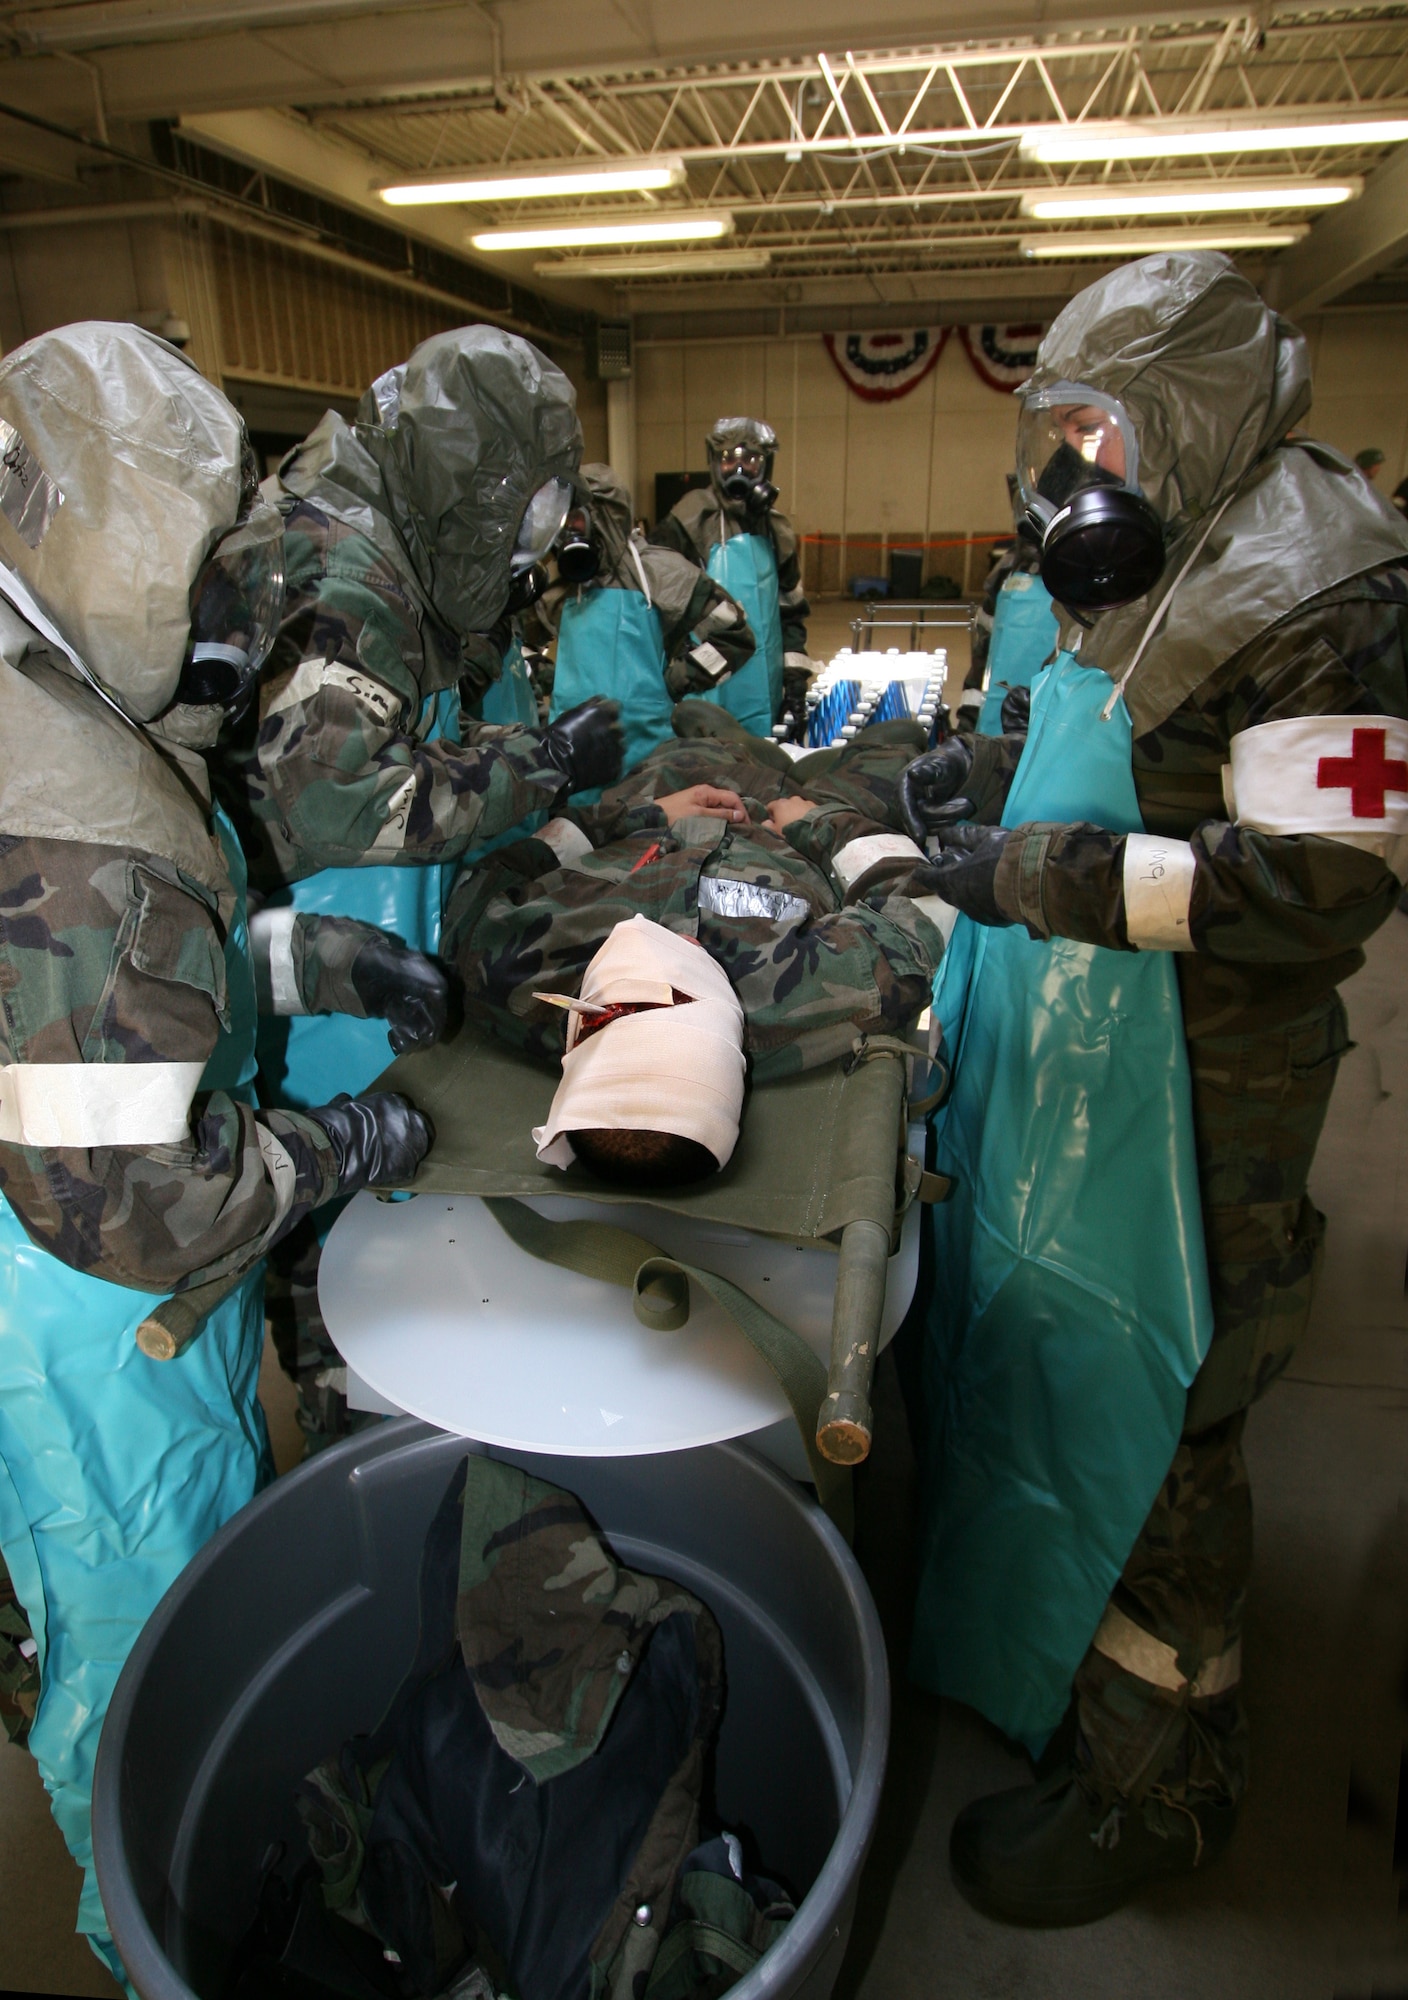 HILL AIR FORCE BASE, Utah--Hill Air Force Base medical staff works on one of the moulaged victims during an exercise. (U.S. Air Force photo by Beth Young)